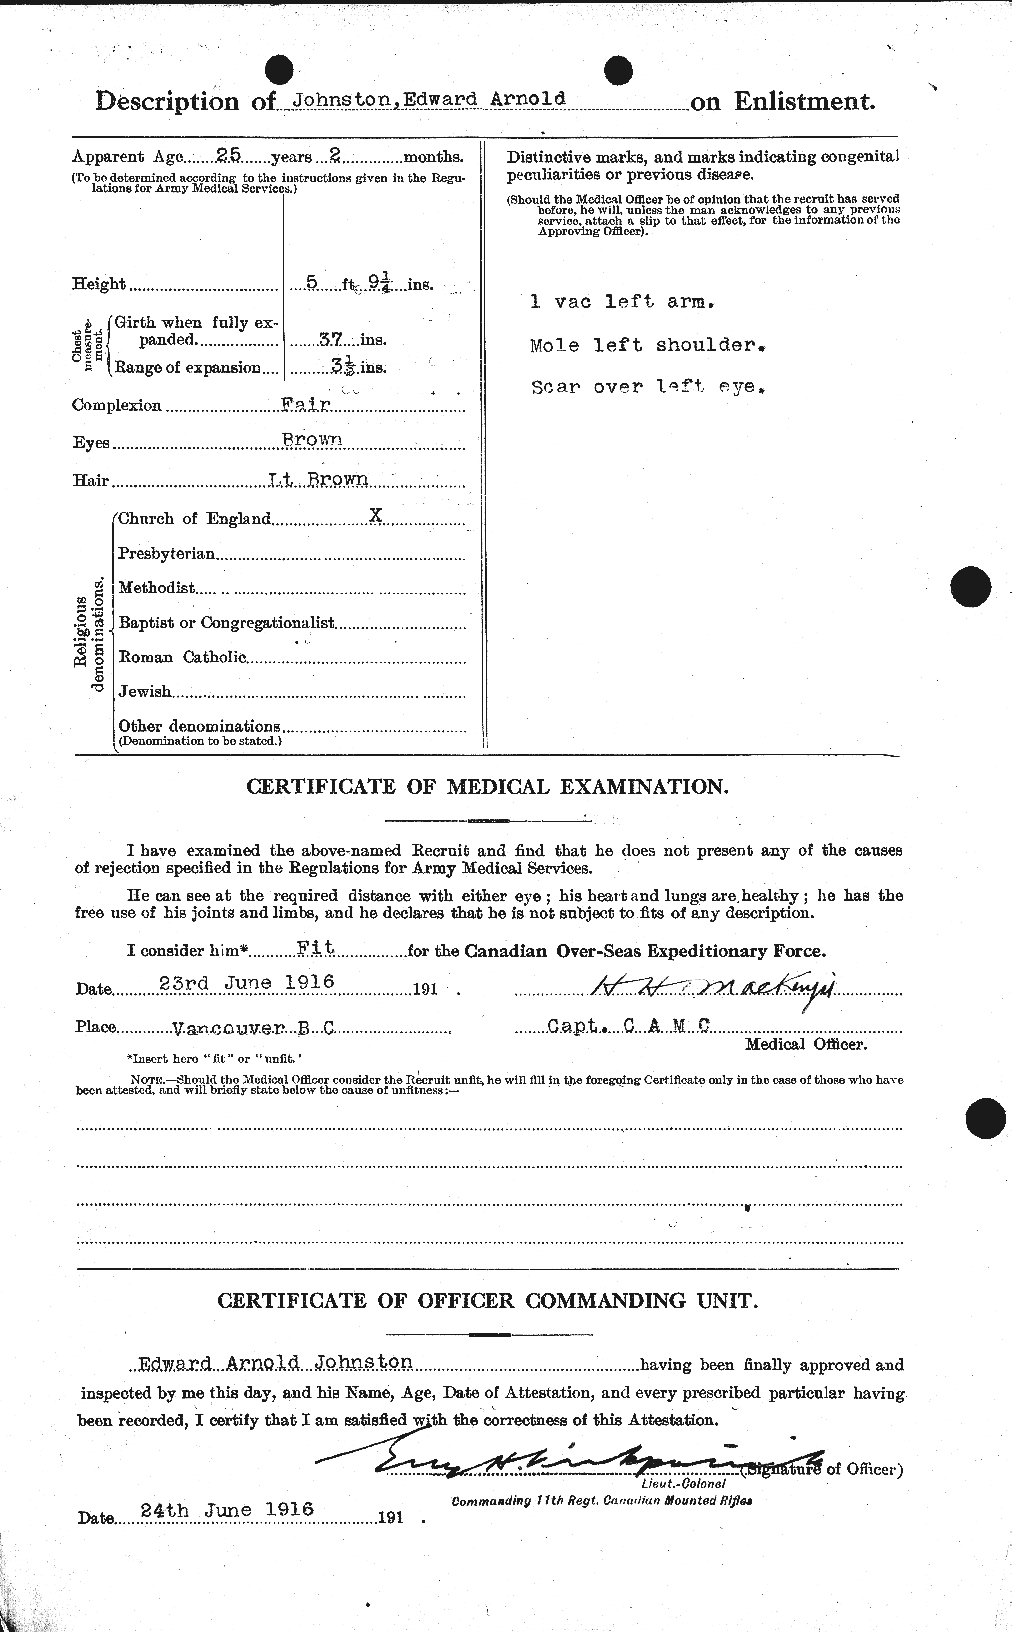 Personnel Records of the First World War - CEF 423224b